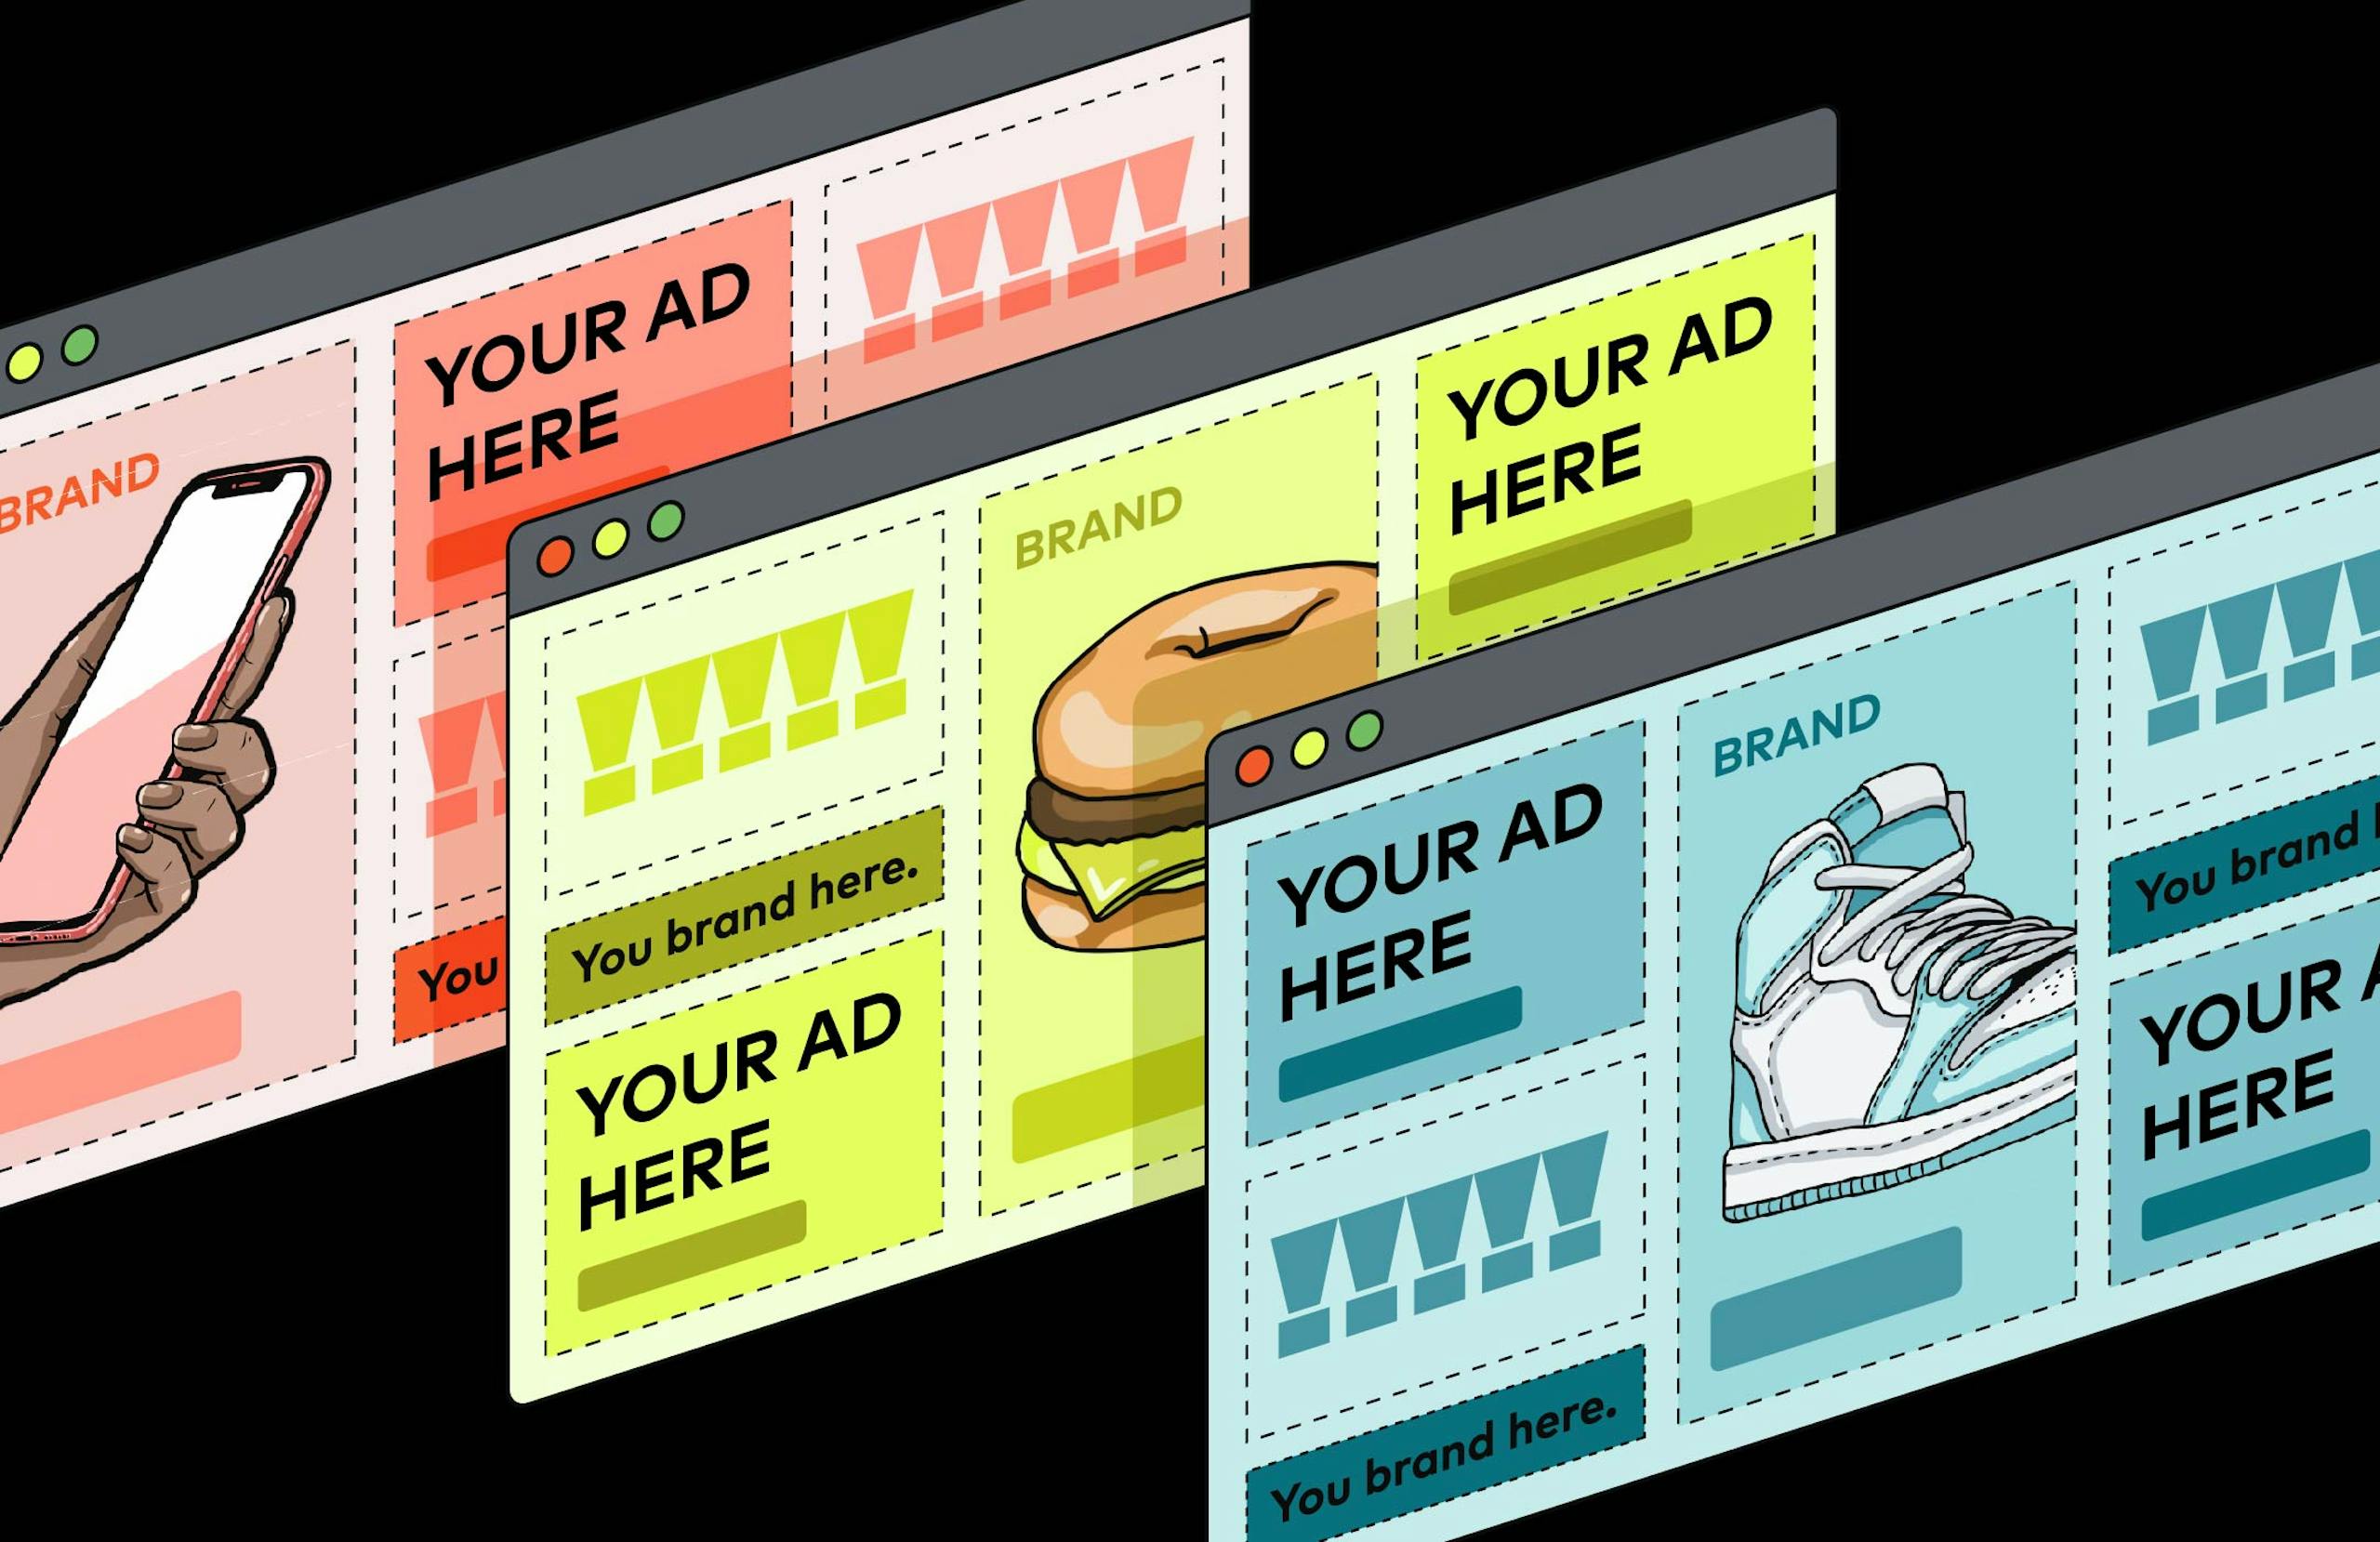 Three digital windows showing ad space ready to be used. The multiple windows point to the multiple ad networks and environments where brands can advertise.